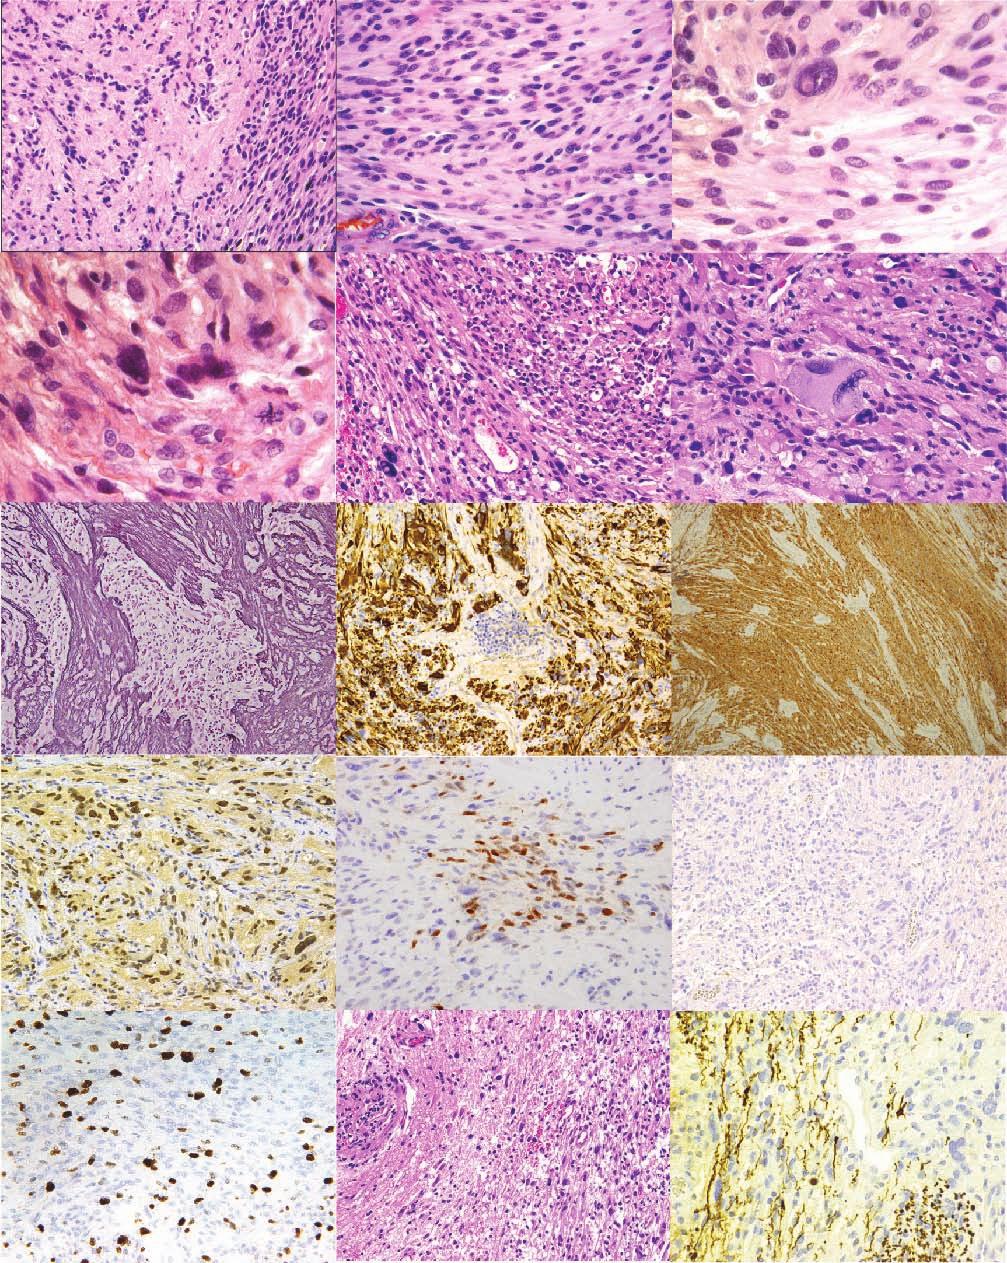 J Neuropathol Exp Neurol Volume 74, Number 10, October 2015 Primary Meningeal Pleomorphic Xanthoastrocytoma FIGURE 2. Histologic findings in Case 1. (A) Low-power photomicrograph of tumor (H&E stain).